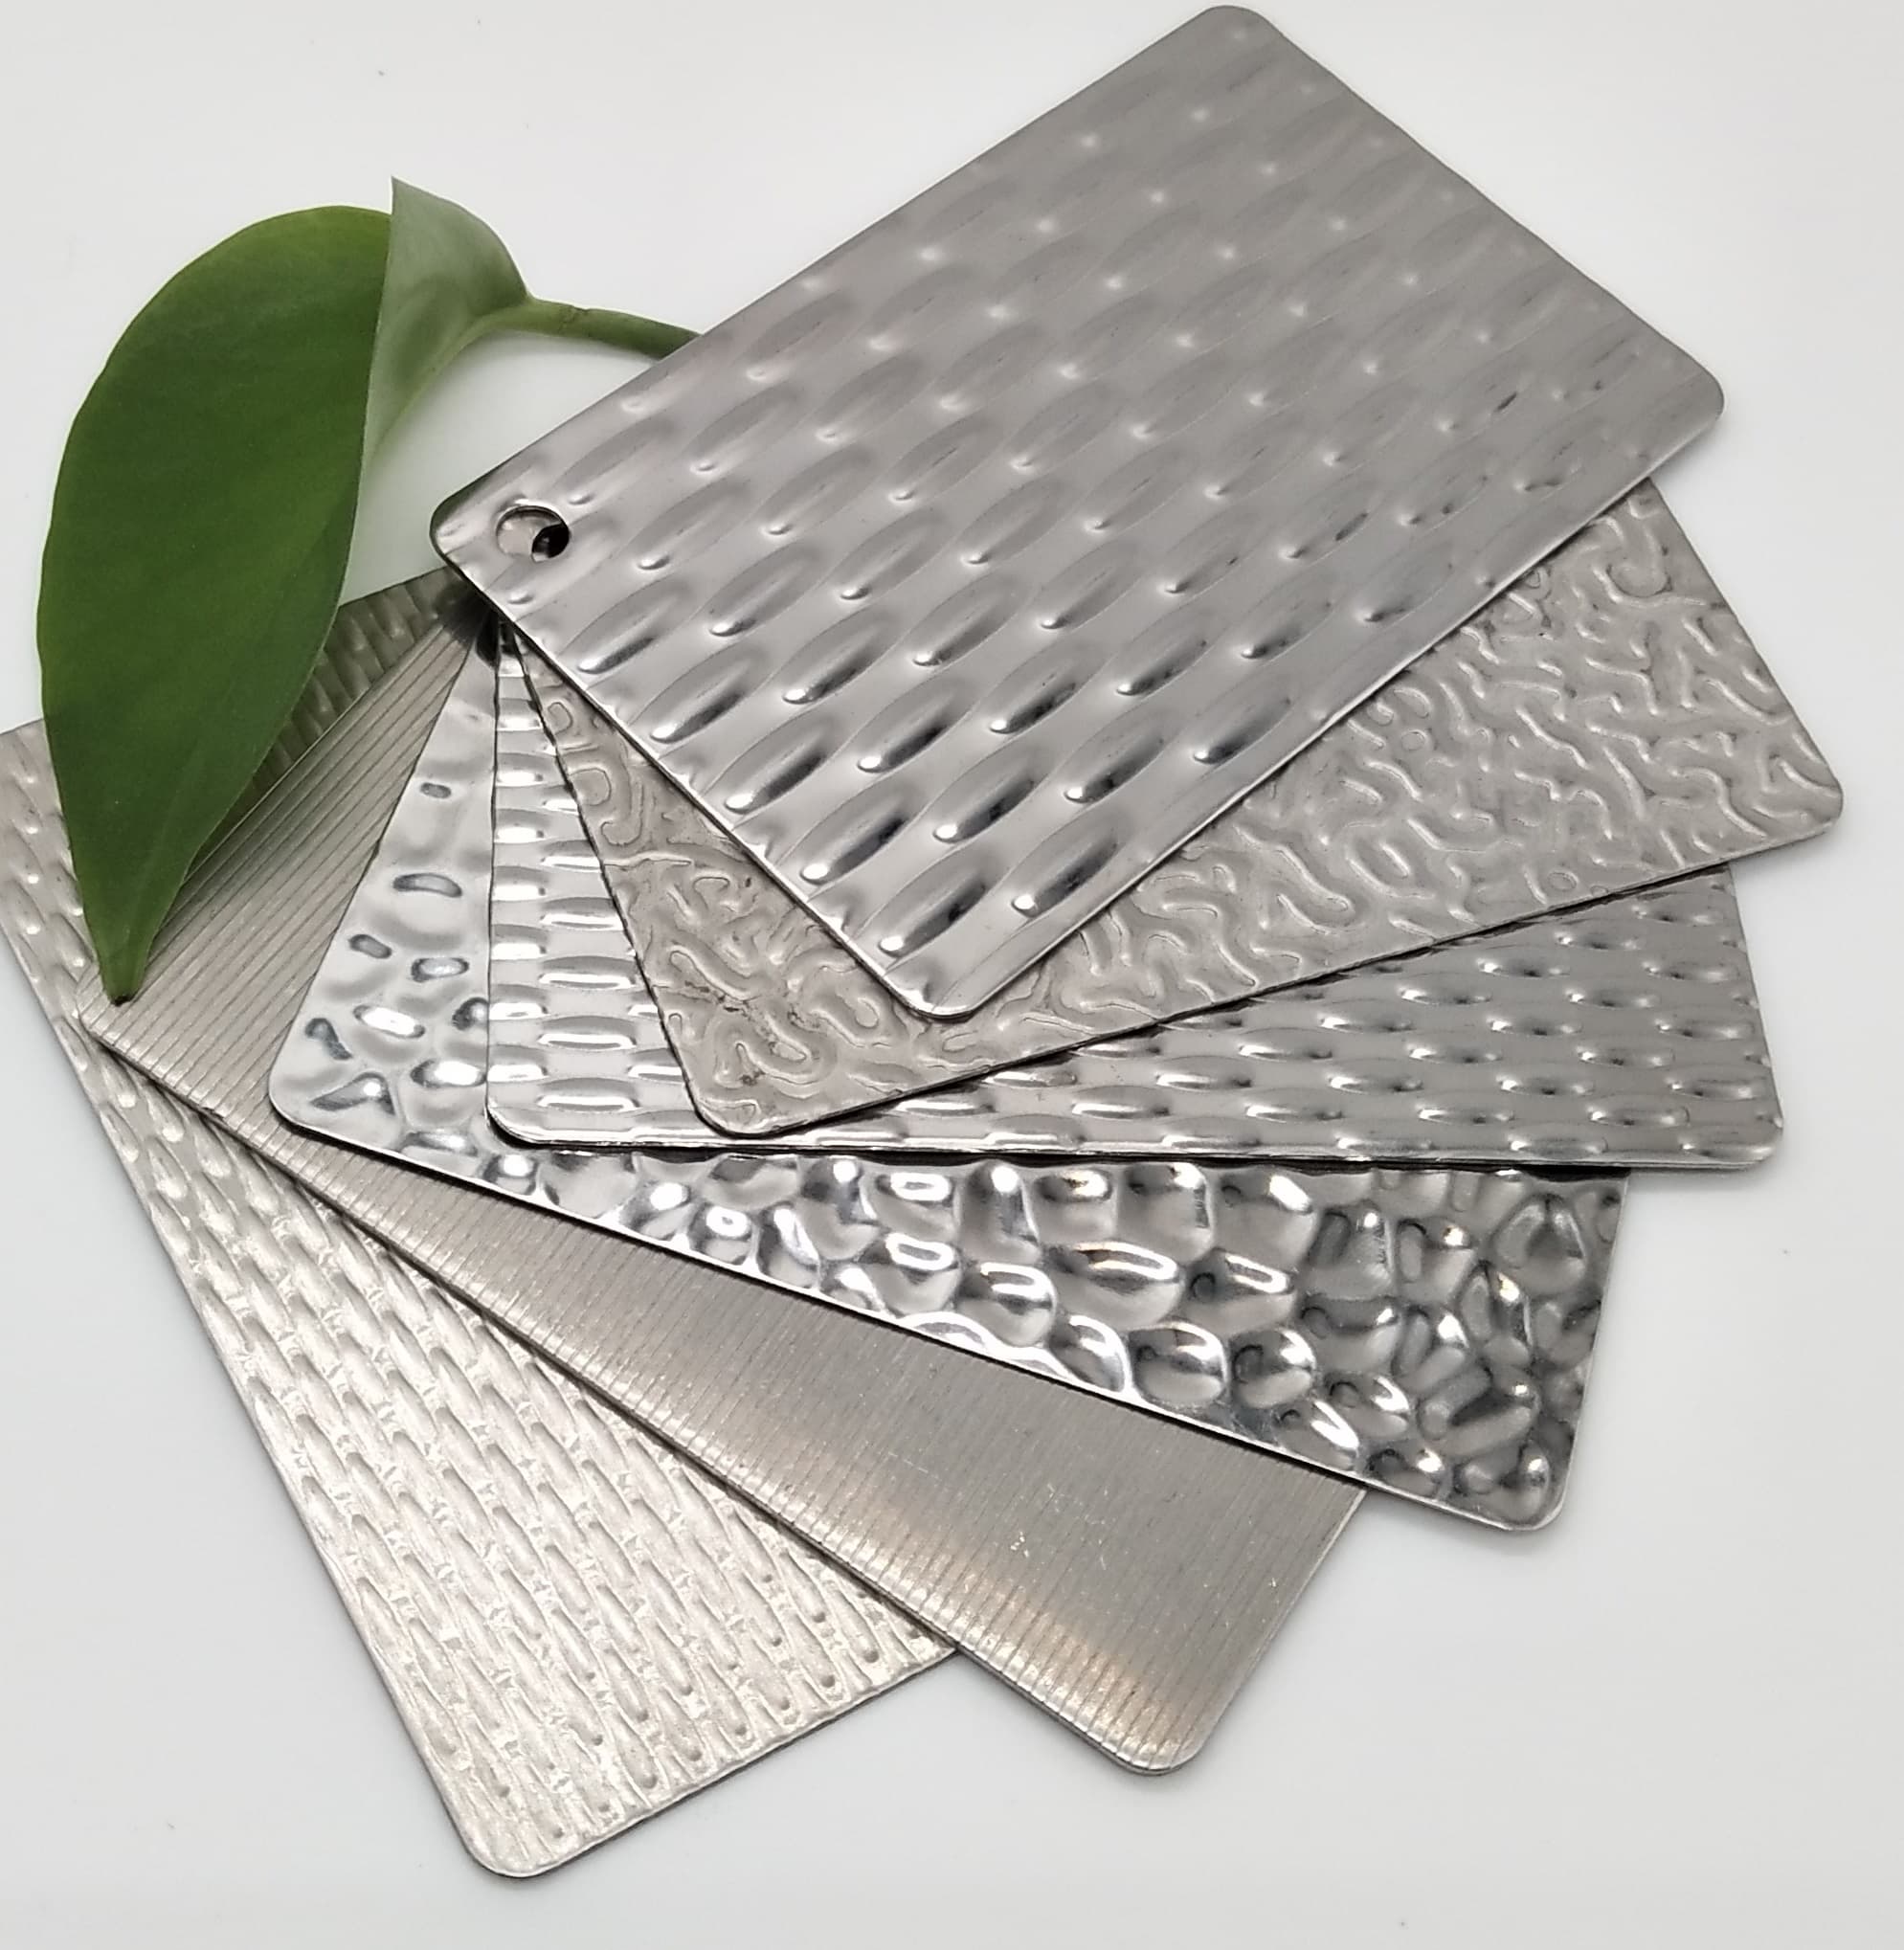 Do you know the process of stainless steel embossing sheet？